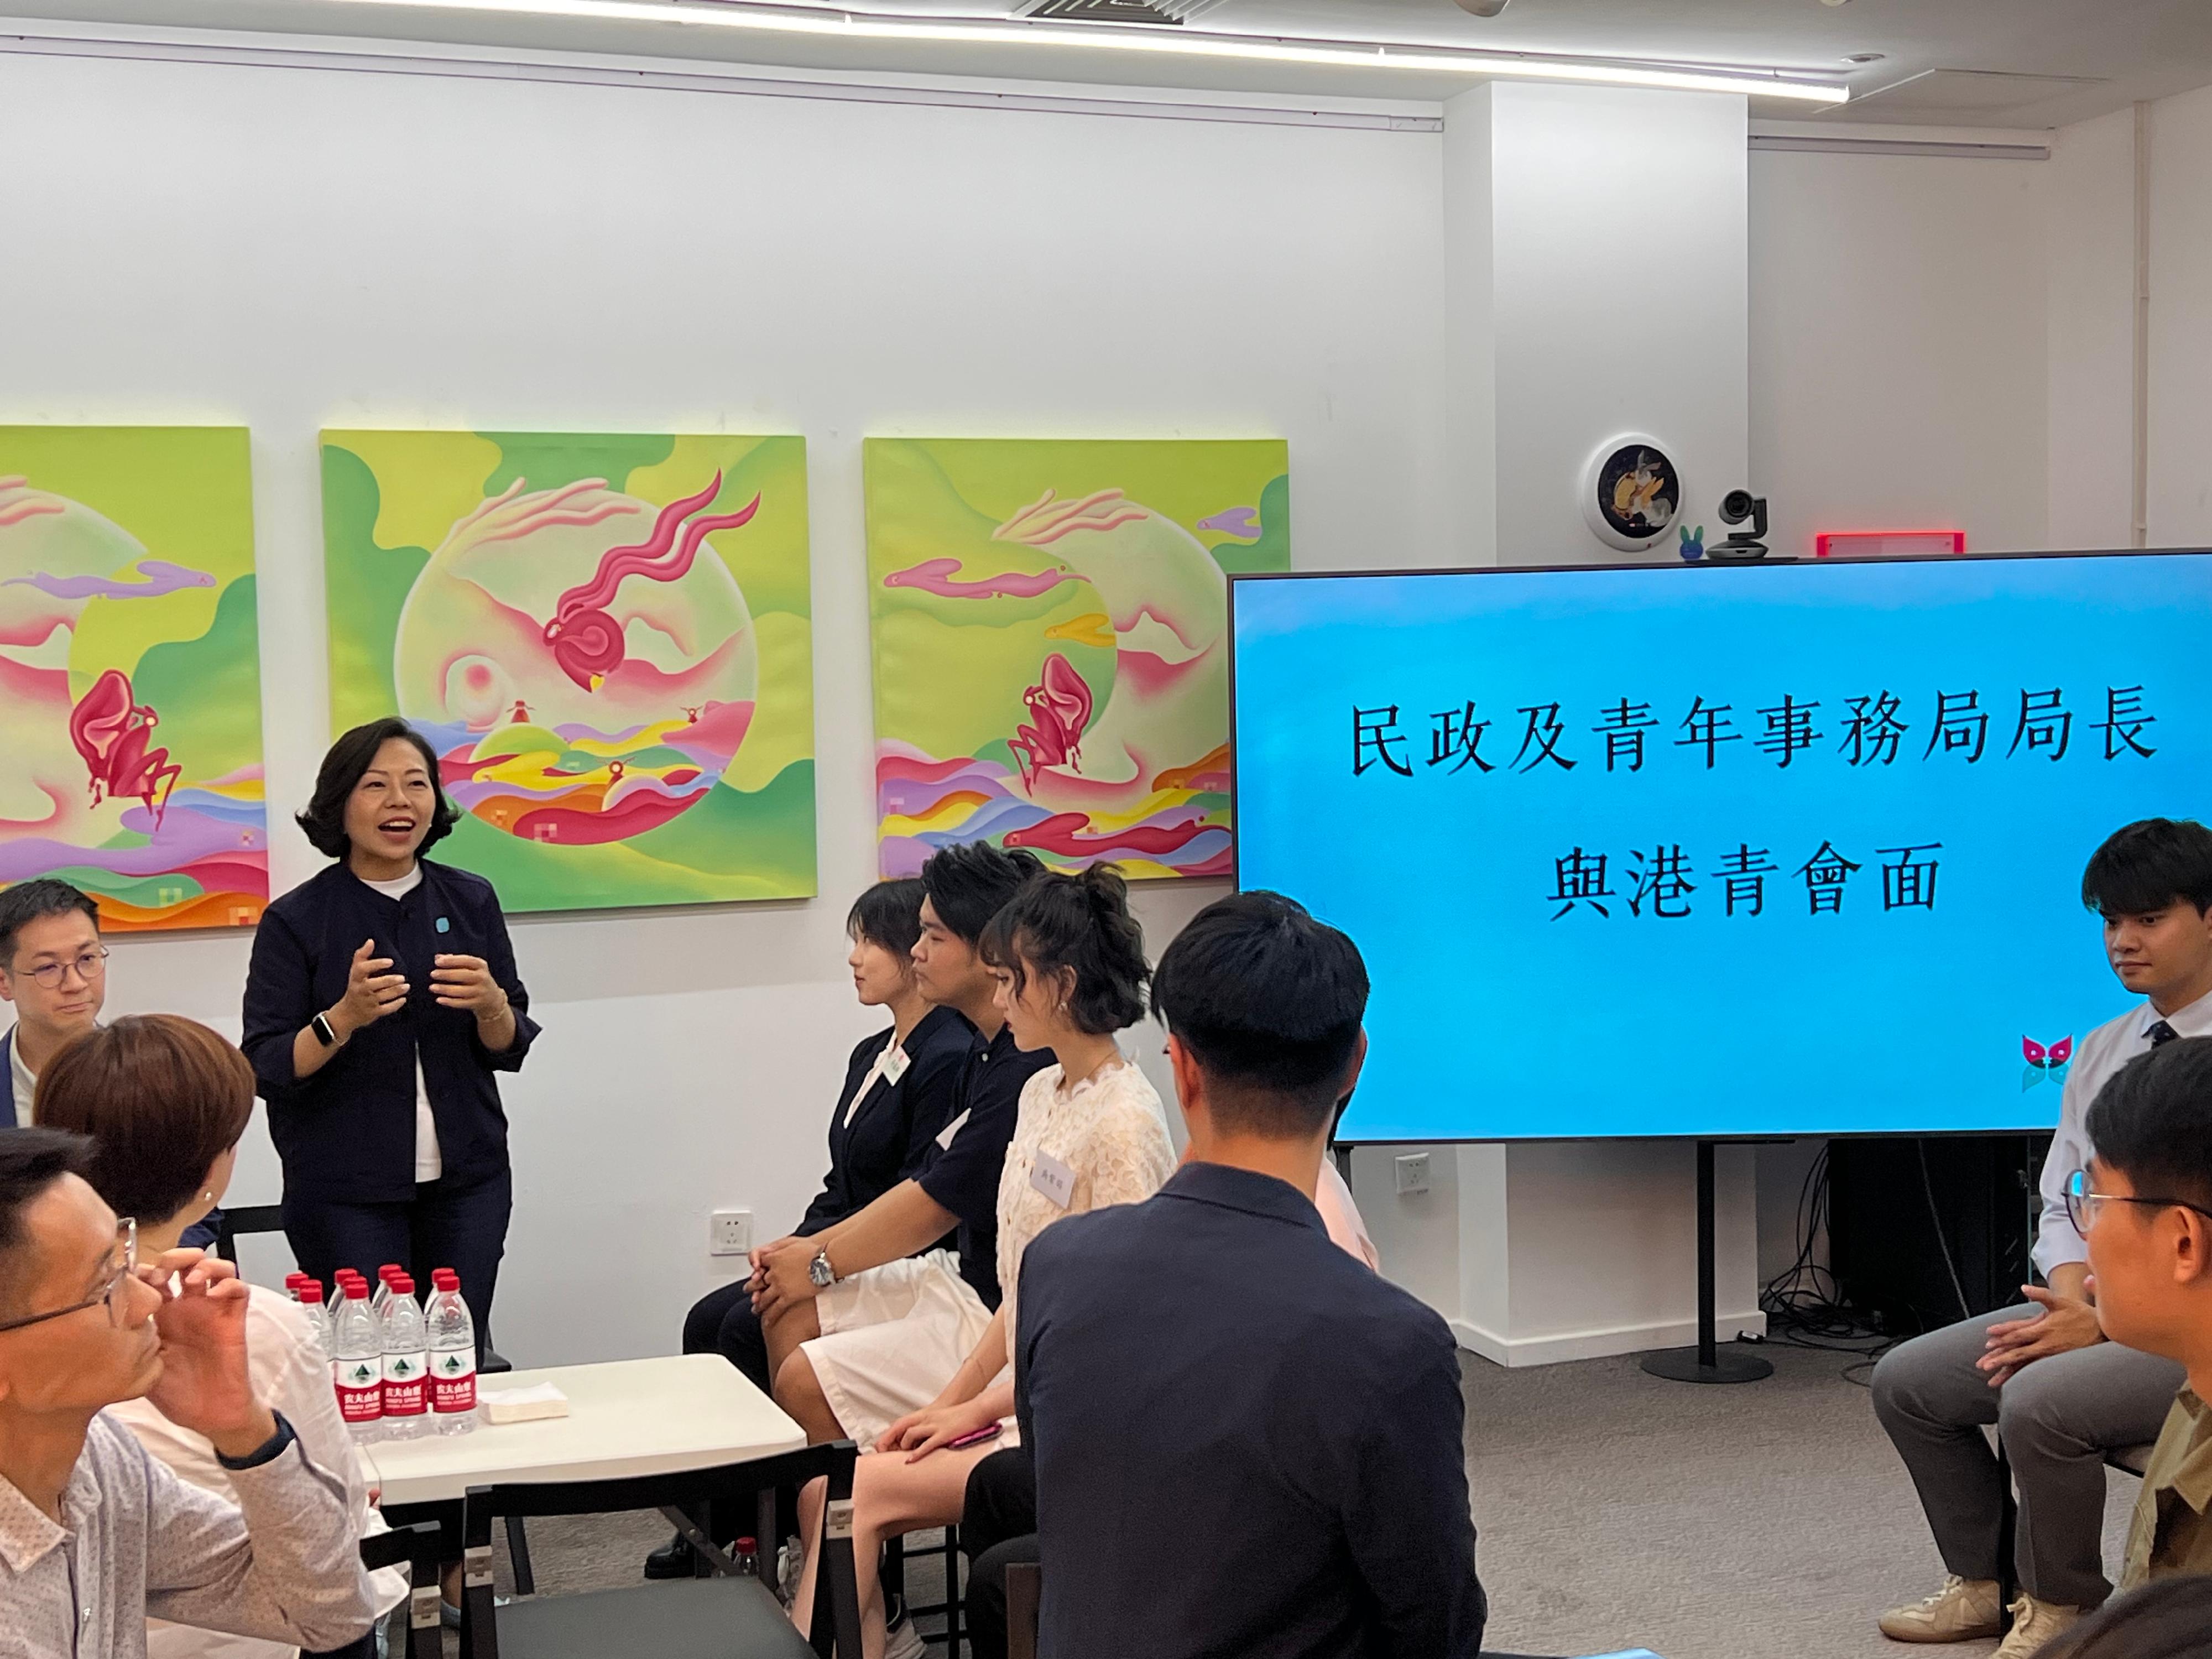 The Secretary for Home and Youth Affairs, Miss Alice Mak, began her visit in Beijing yesterday (July 16). Photo shows Miss Mak (back row, second left) meeting with Hong Kong youths and student groups in Beijing upon her arrival to learn about their study, work and life on the Mainland.
